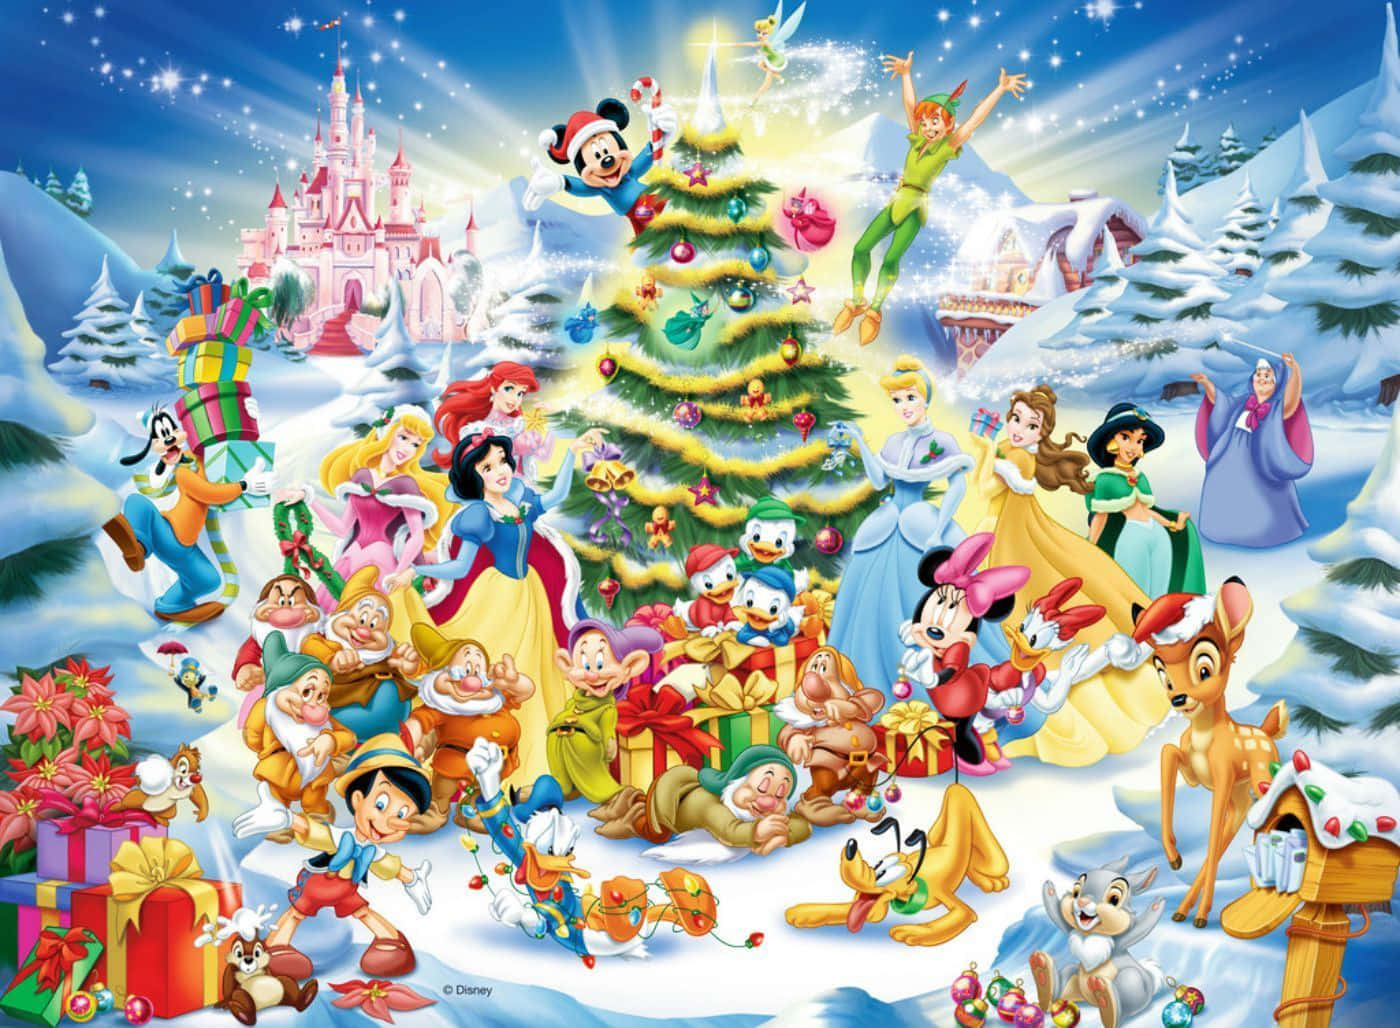 "Bring the Magic Of Christmas Home with Disney's Ipad" Wallpaper